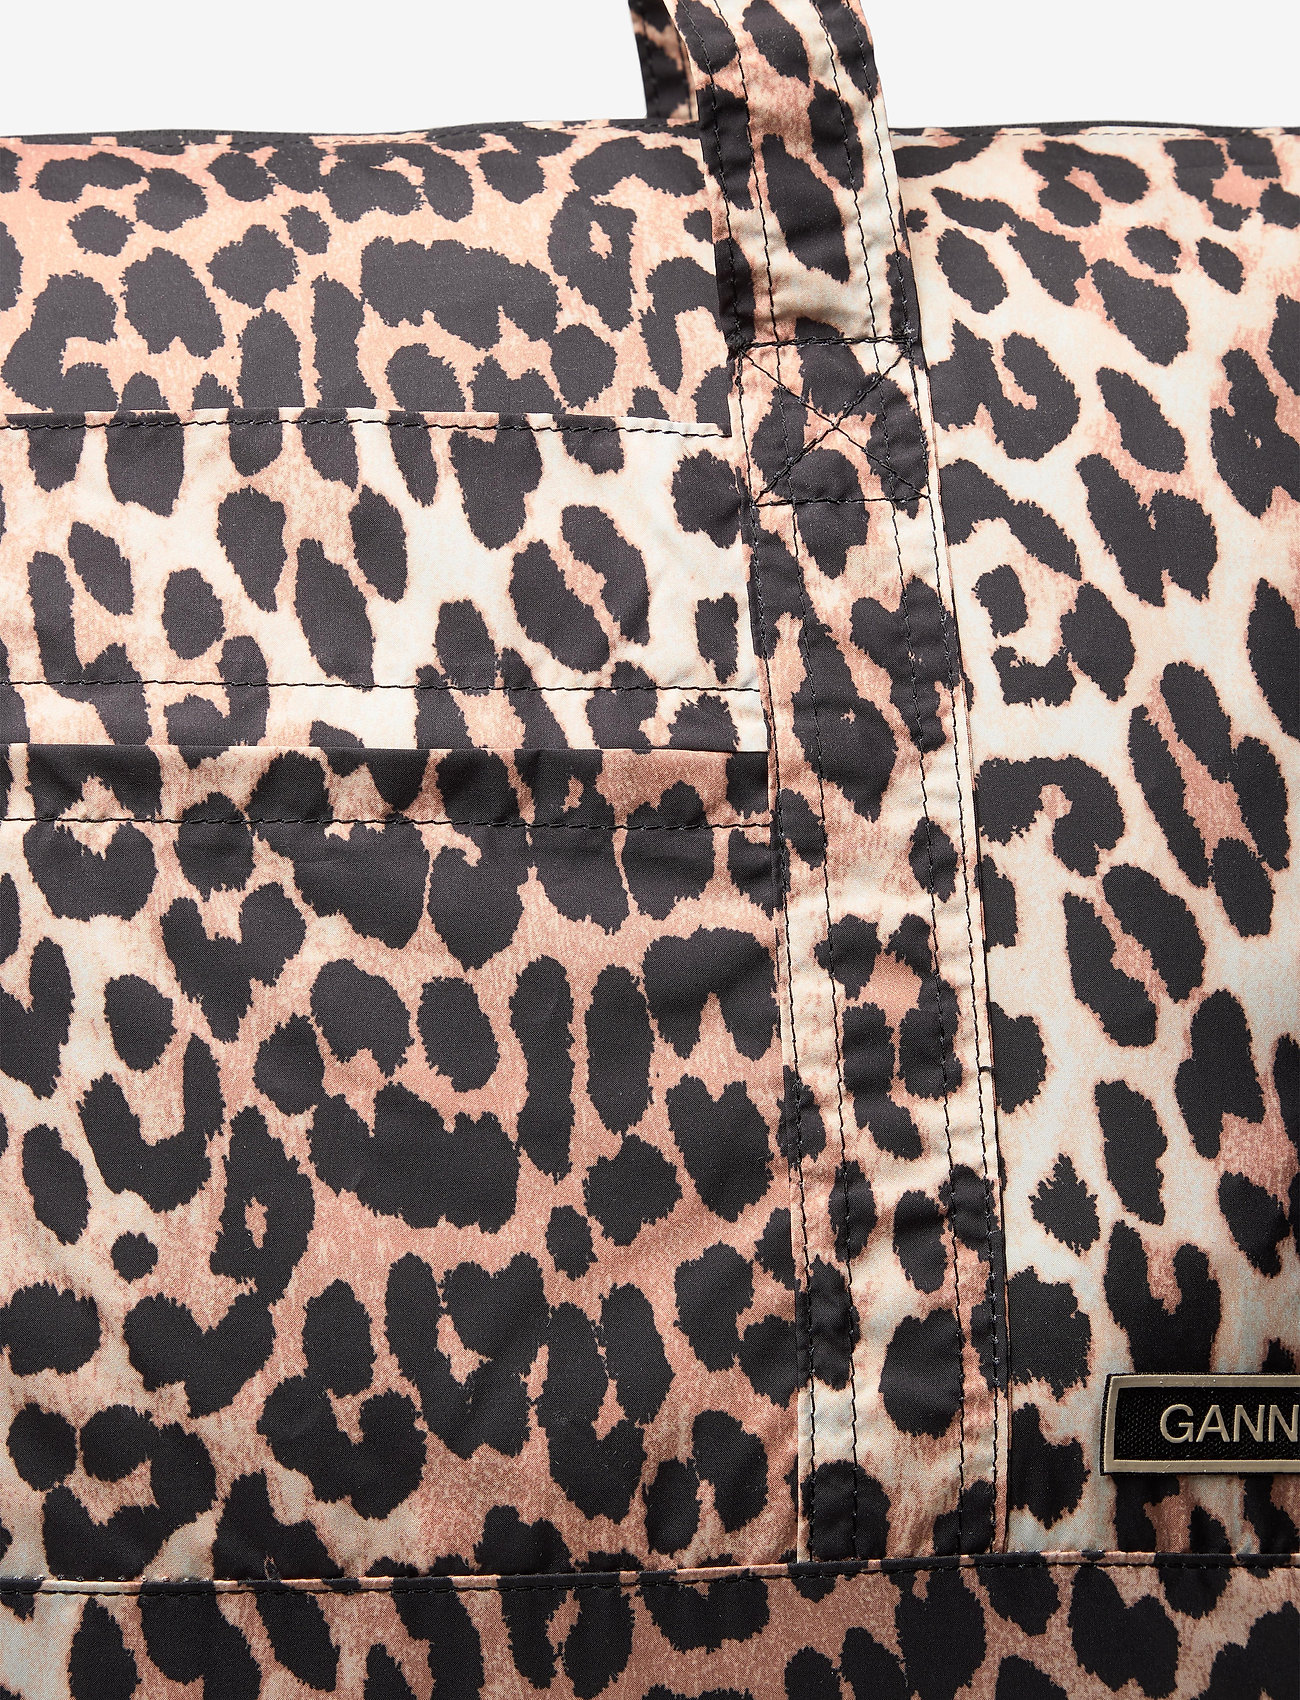 Ganni - Recycled Tech Fabric Bags - tote bags - leopard - 3